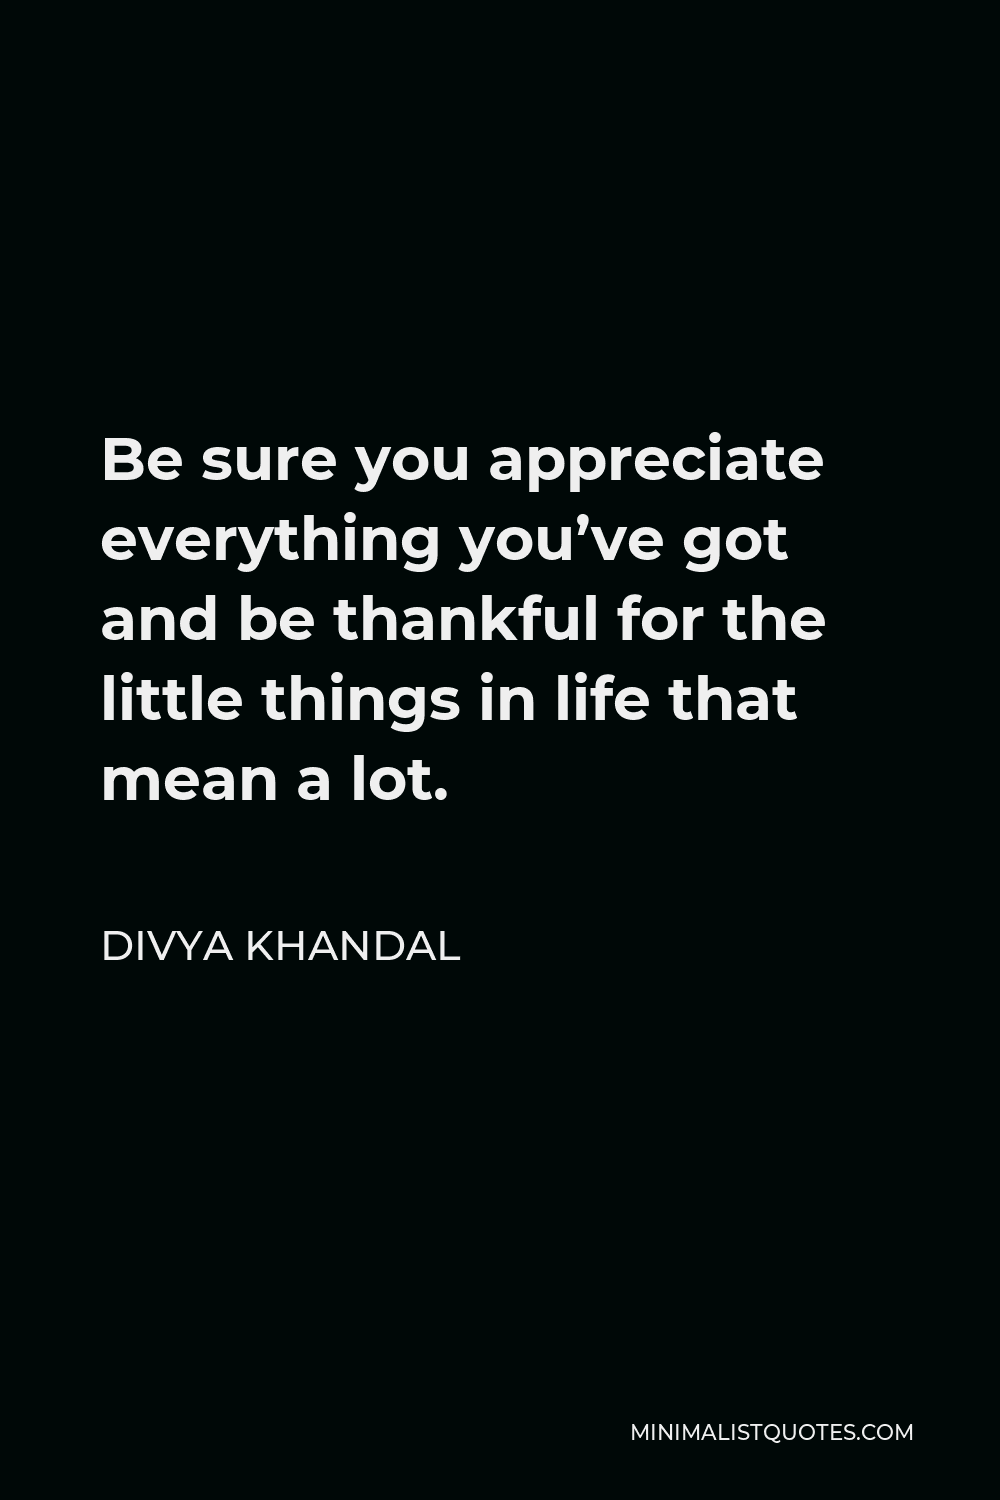 Divya khandal Quote - Be sure you appreciate everything you’ve got and be thankful for the little things in life that mean a lot.